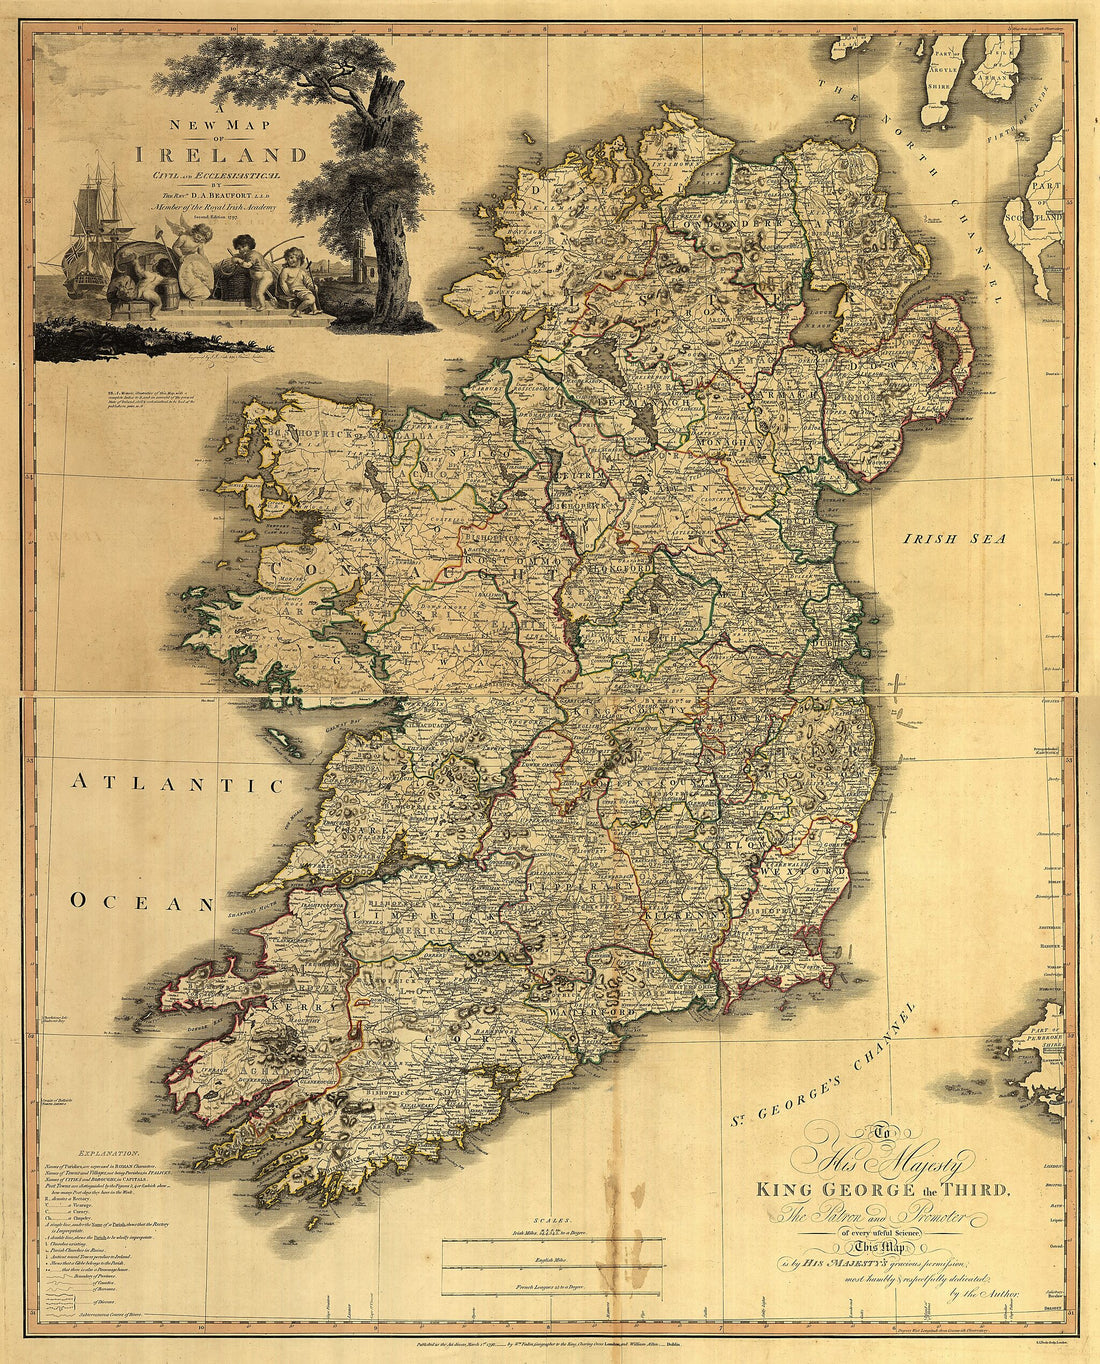 This old map of Memoir of a Map of Ireland from 1797 was created by Daniel Augustus Beaufort, William Faden, Samuel John Neele,  W. Allen (Firm) in 1797